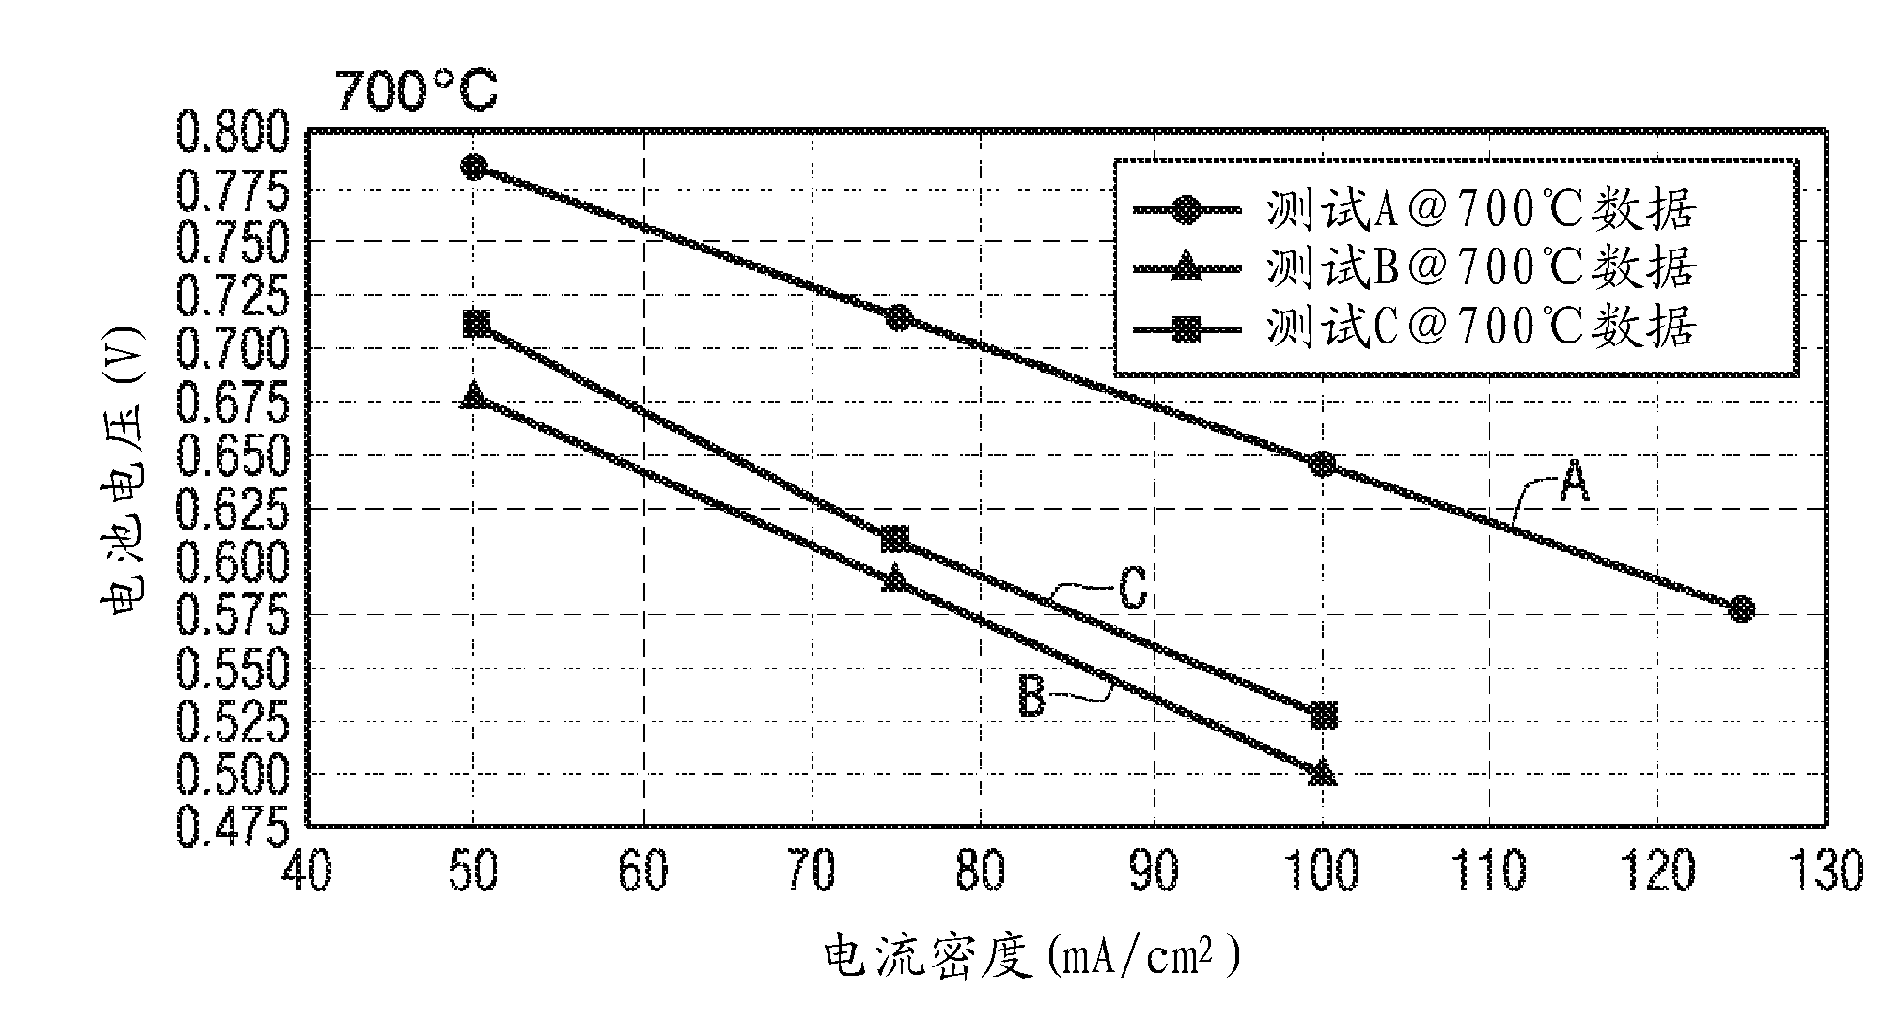 Bi containing solid oxide fuel cell system with improved performance and reduced manufacturing costs